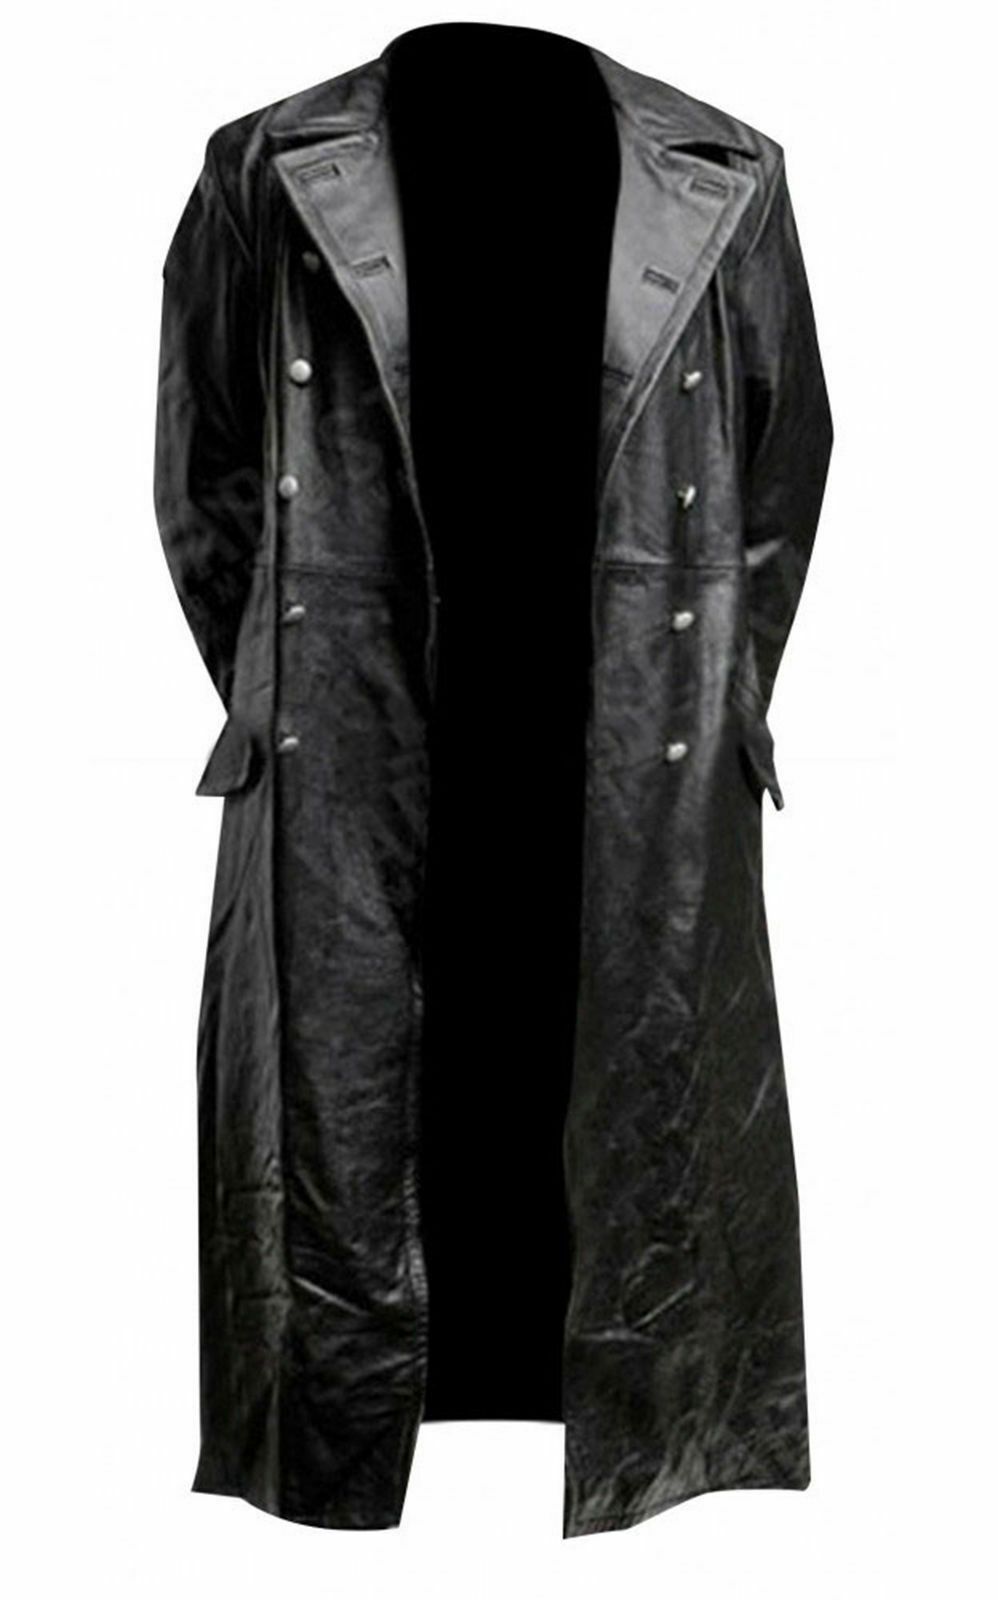 MEN'S CLASSIC OFFICER MILITARY BLACK FAUX/SYNTHETIC LEATHER LONG GERMAN TRENCH COAT